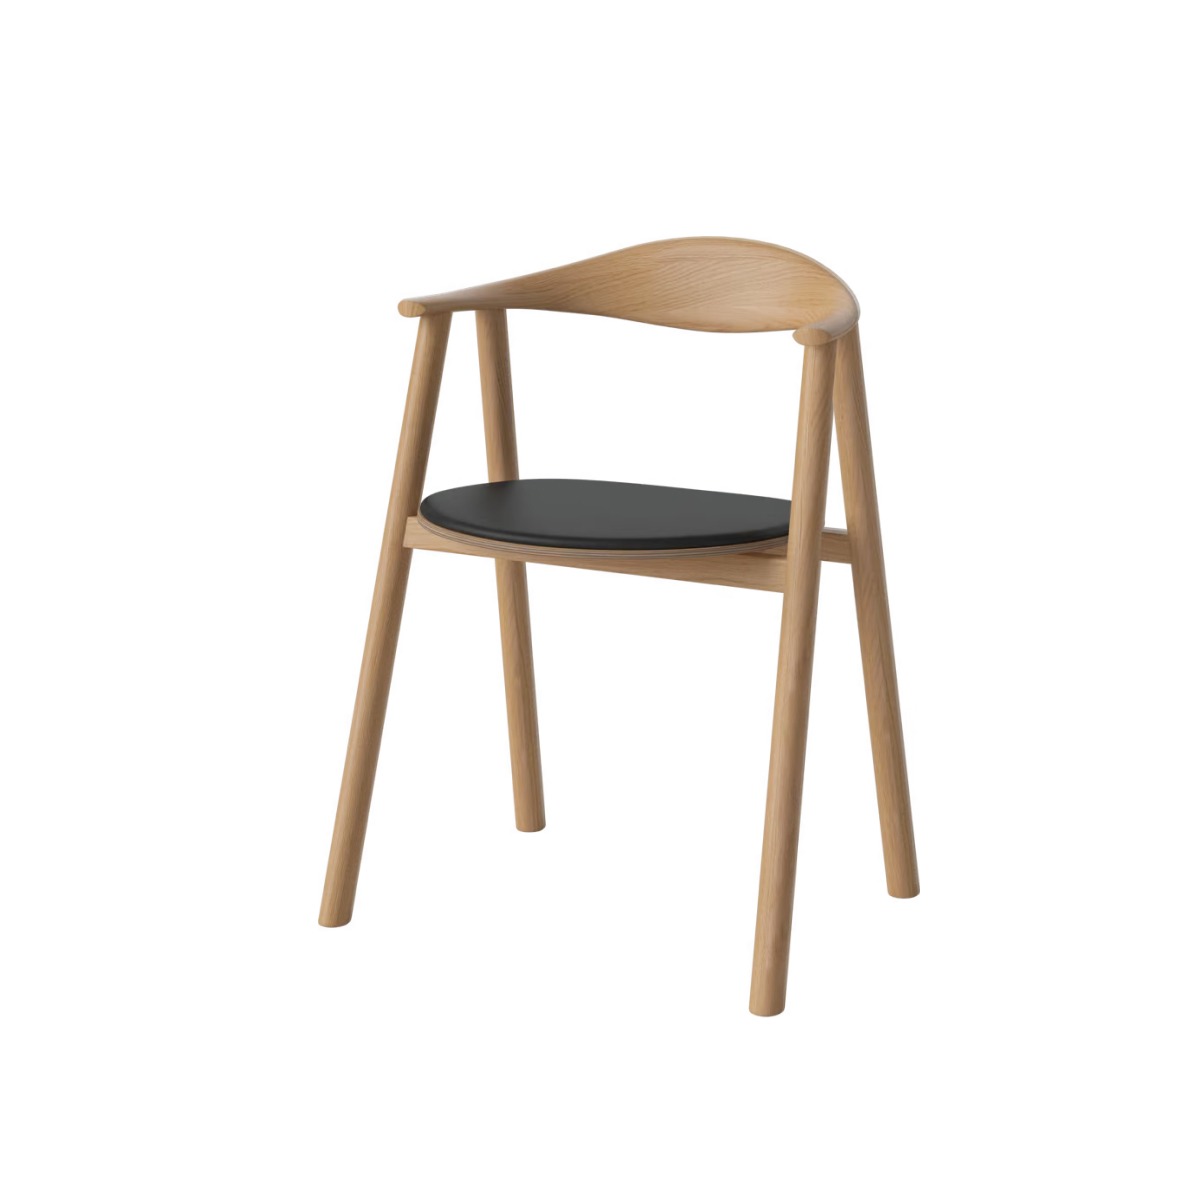 BOLIA Swing Upholstered Dining Chair - Oak / Leather Black